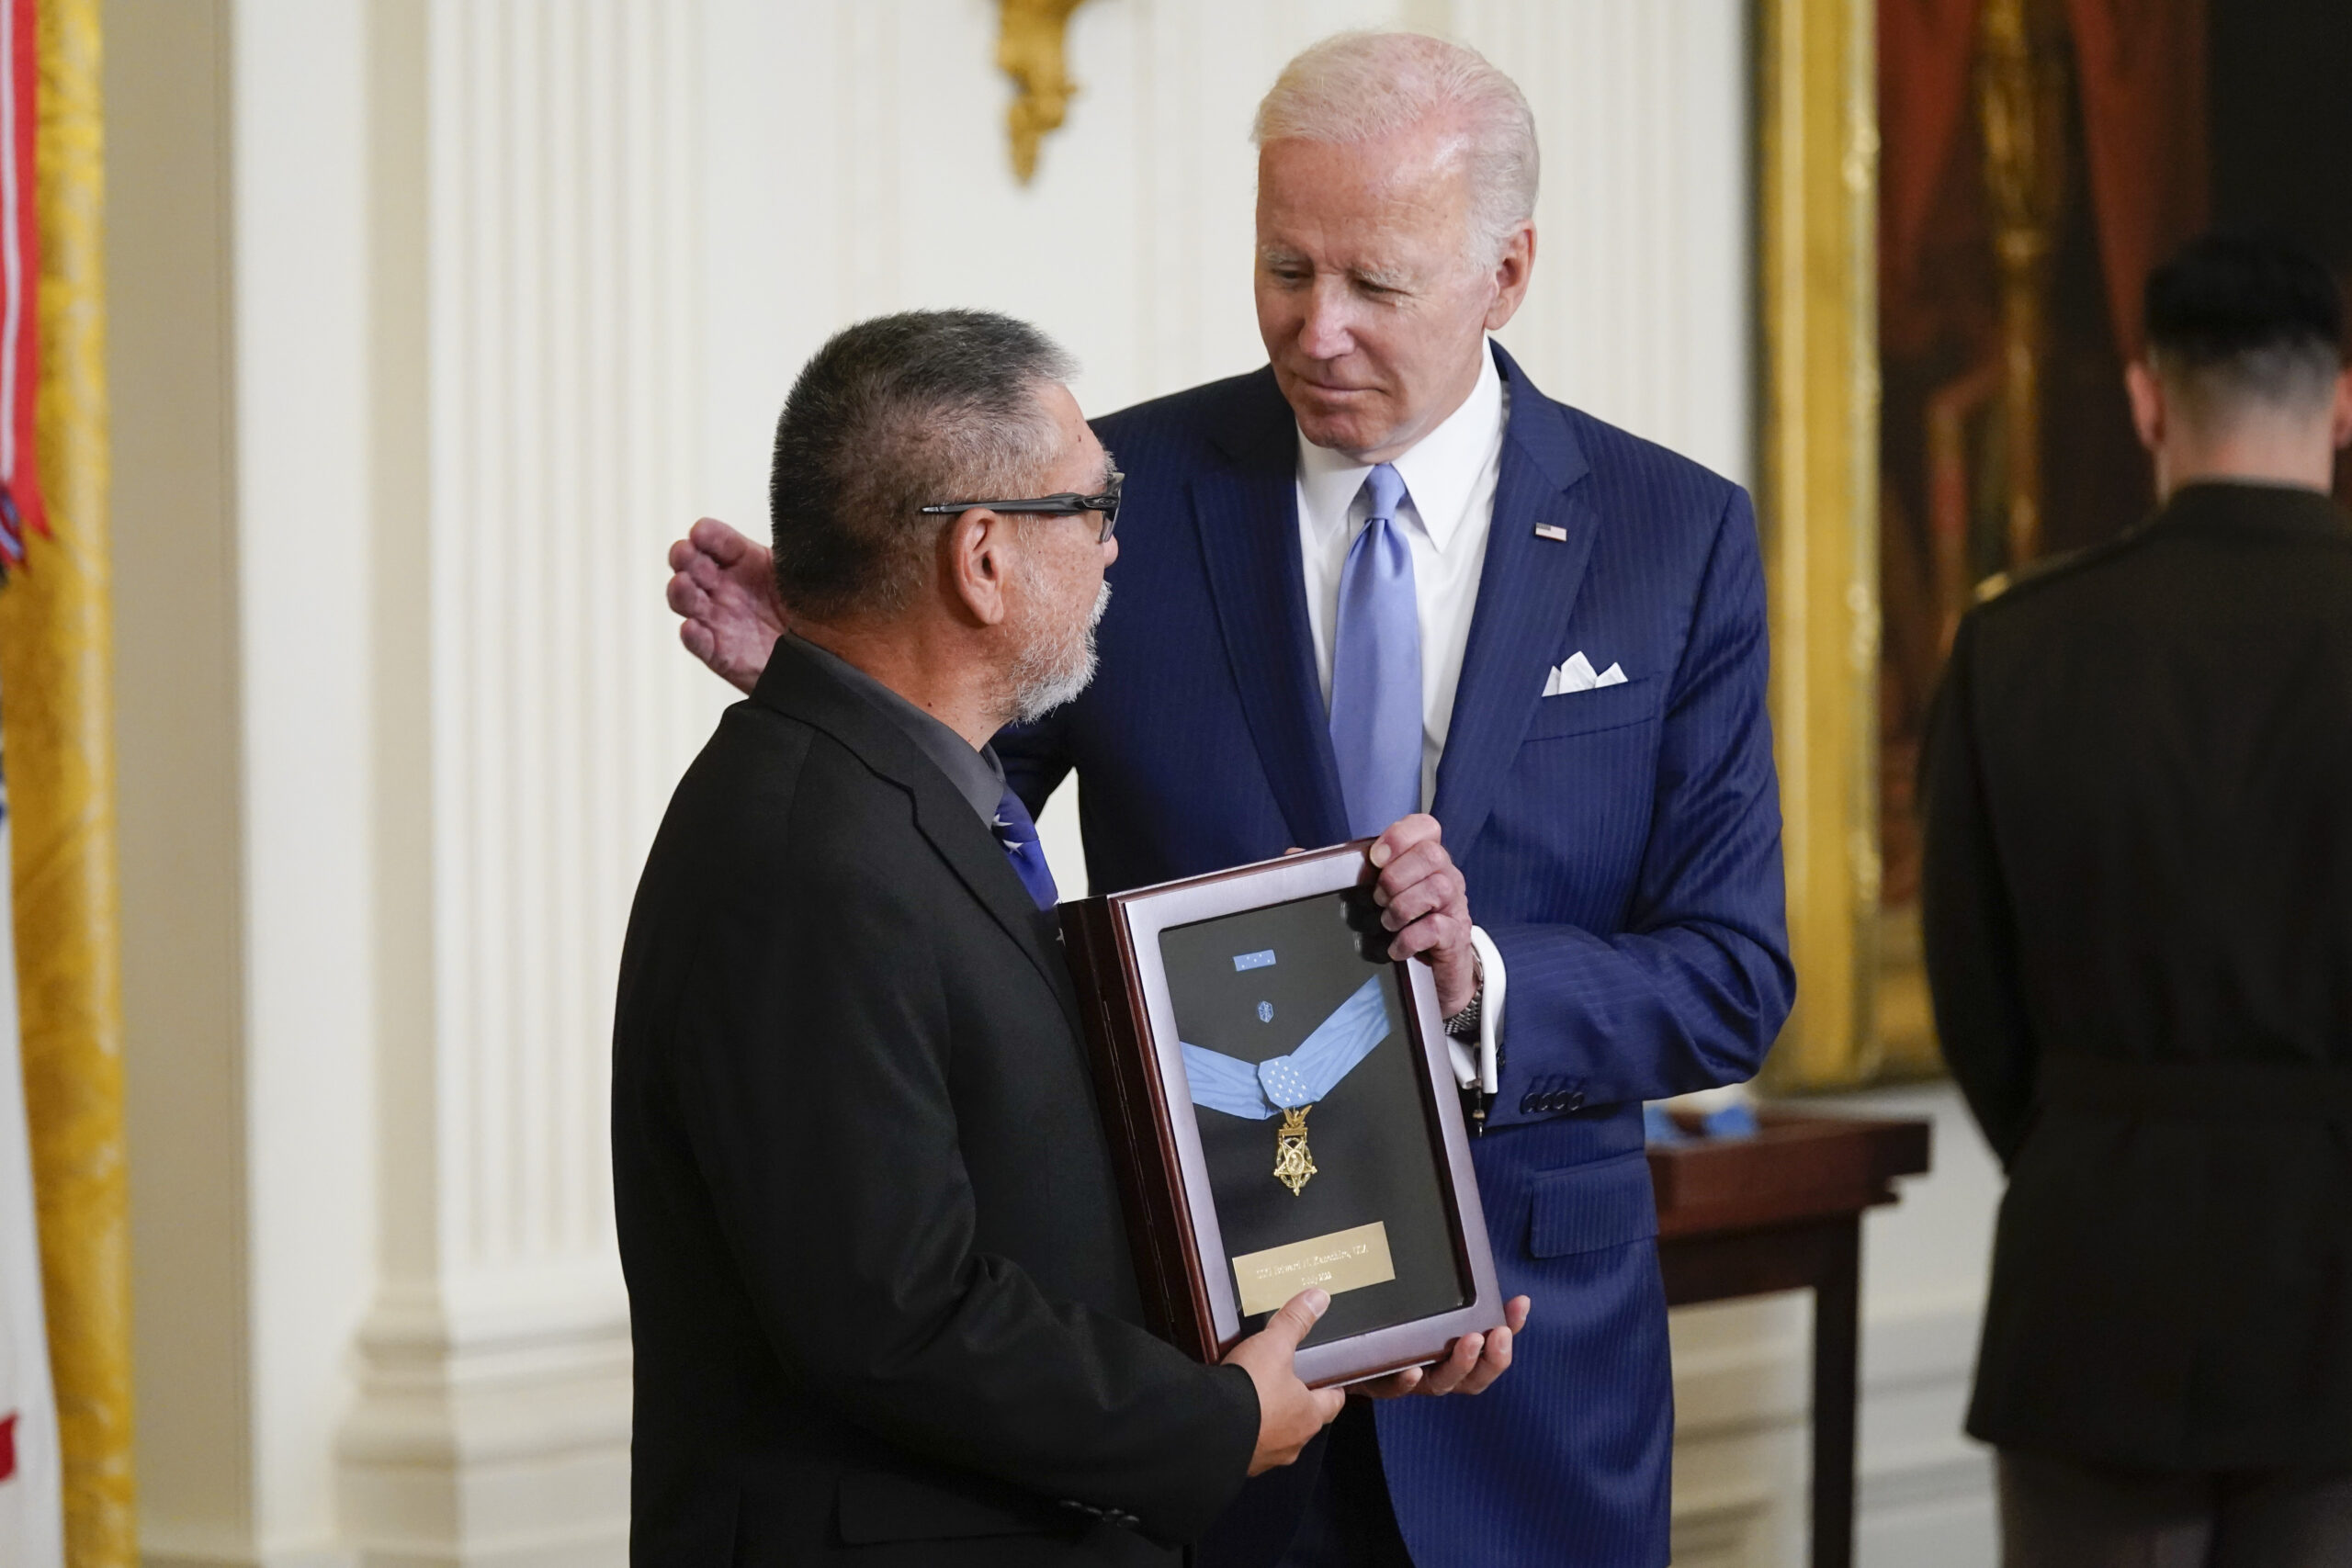 President Joe Biden presents the Medal of Honor to Staff Sgt. Edward Kaneshiro for his actions on Dec. 1, 1966, during the Vietnam War, as his son John Kaneshiro accepts the posthumous recognition during a ceremony in the East Room of the White House, Tuesday, July 5, 2022, in Washington. (AP Photo/Evan Vucci)